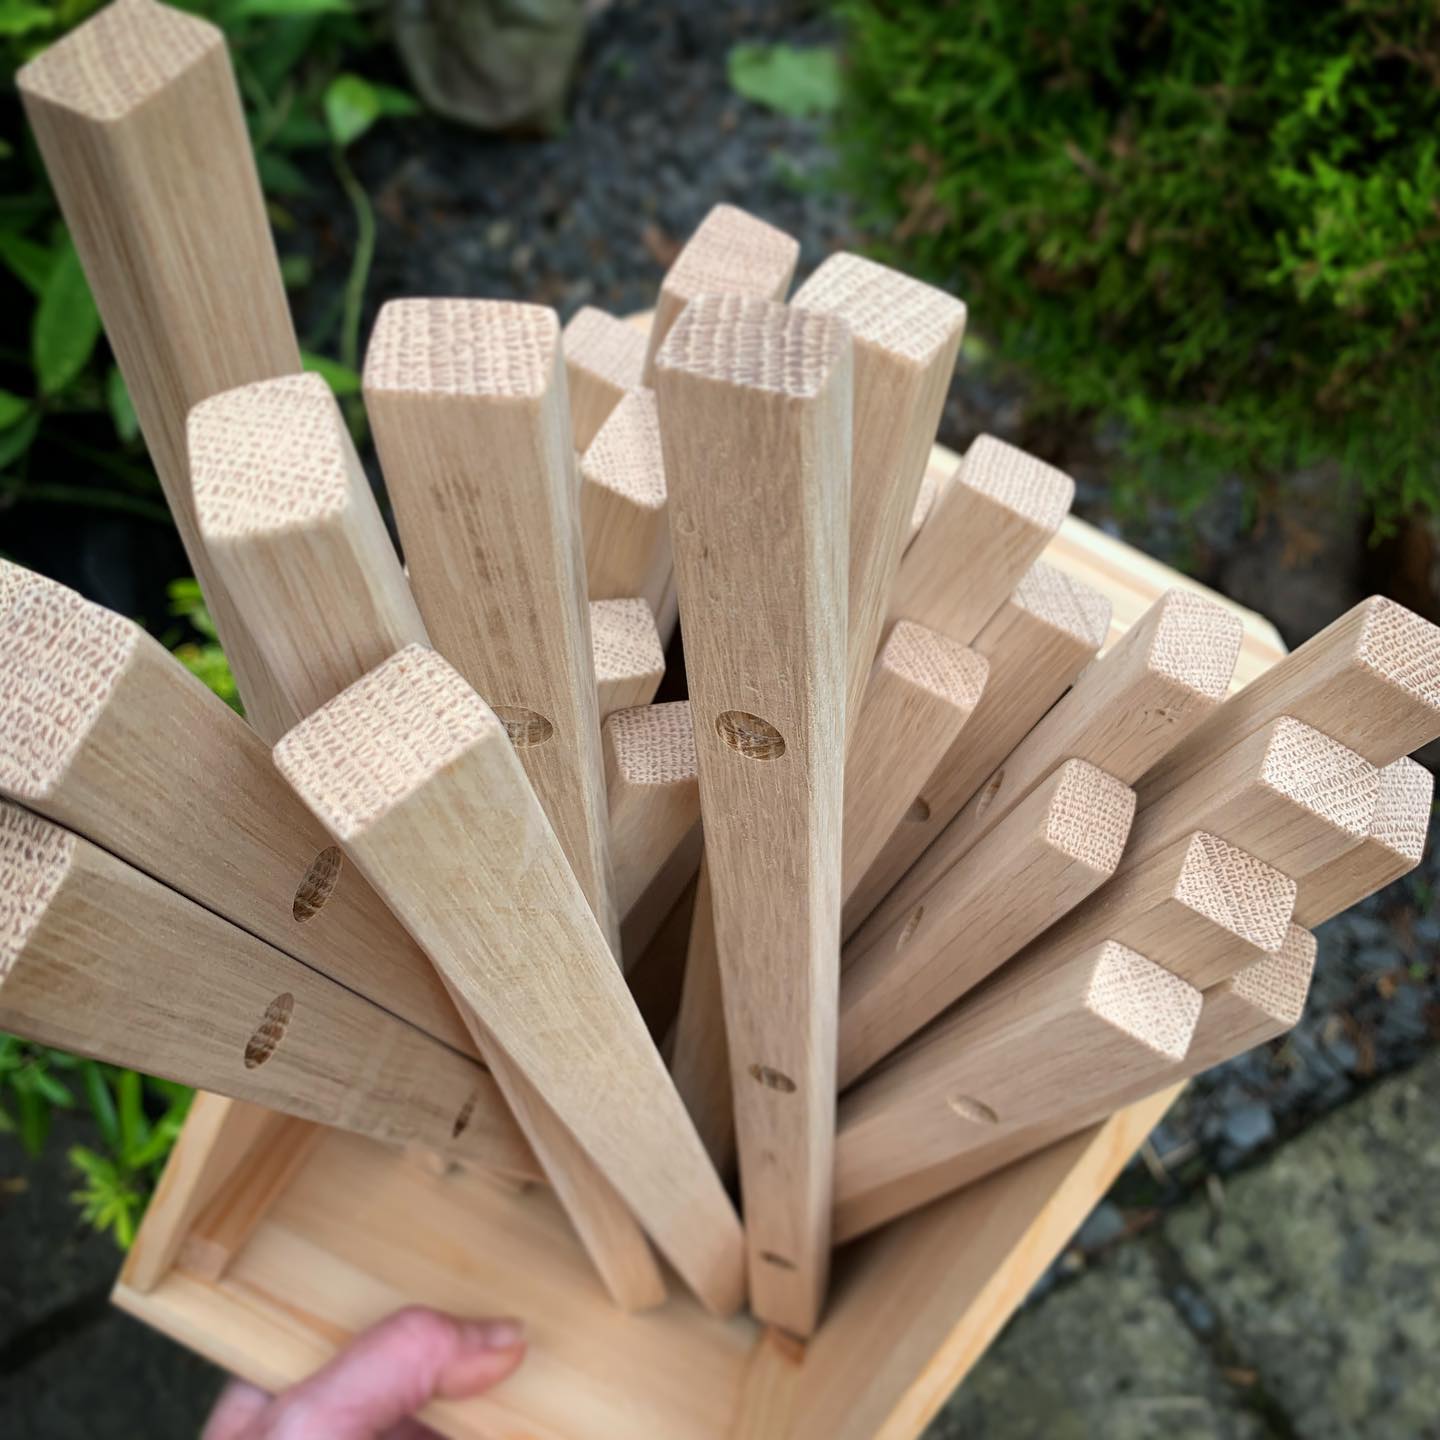 Stocking up on magnetic Picture hangers today ready to deliver to @spacecraftwestbury #handcrafted #homewares #display #newproduct #oak #beautifulwood